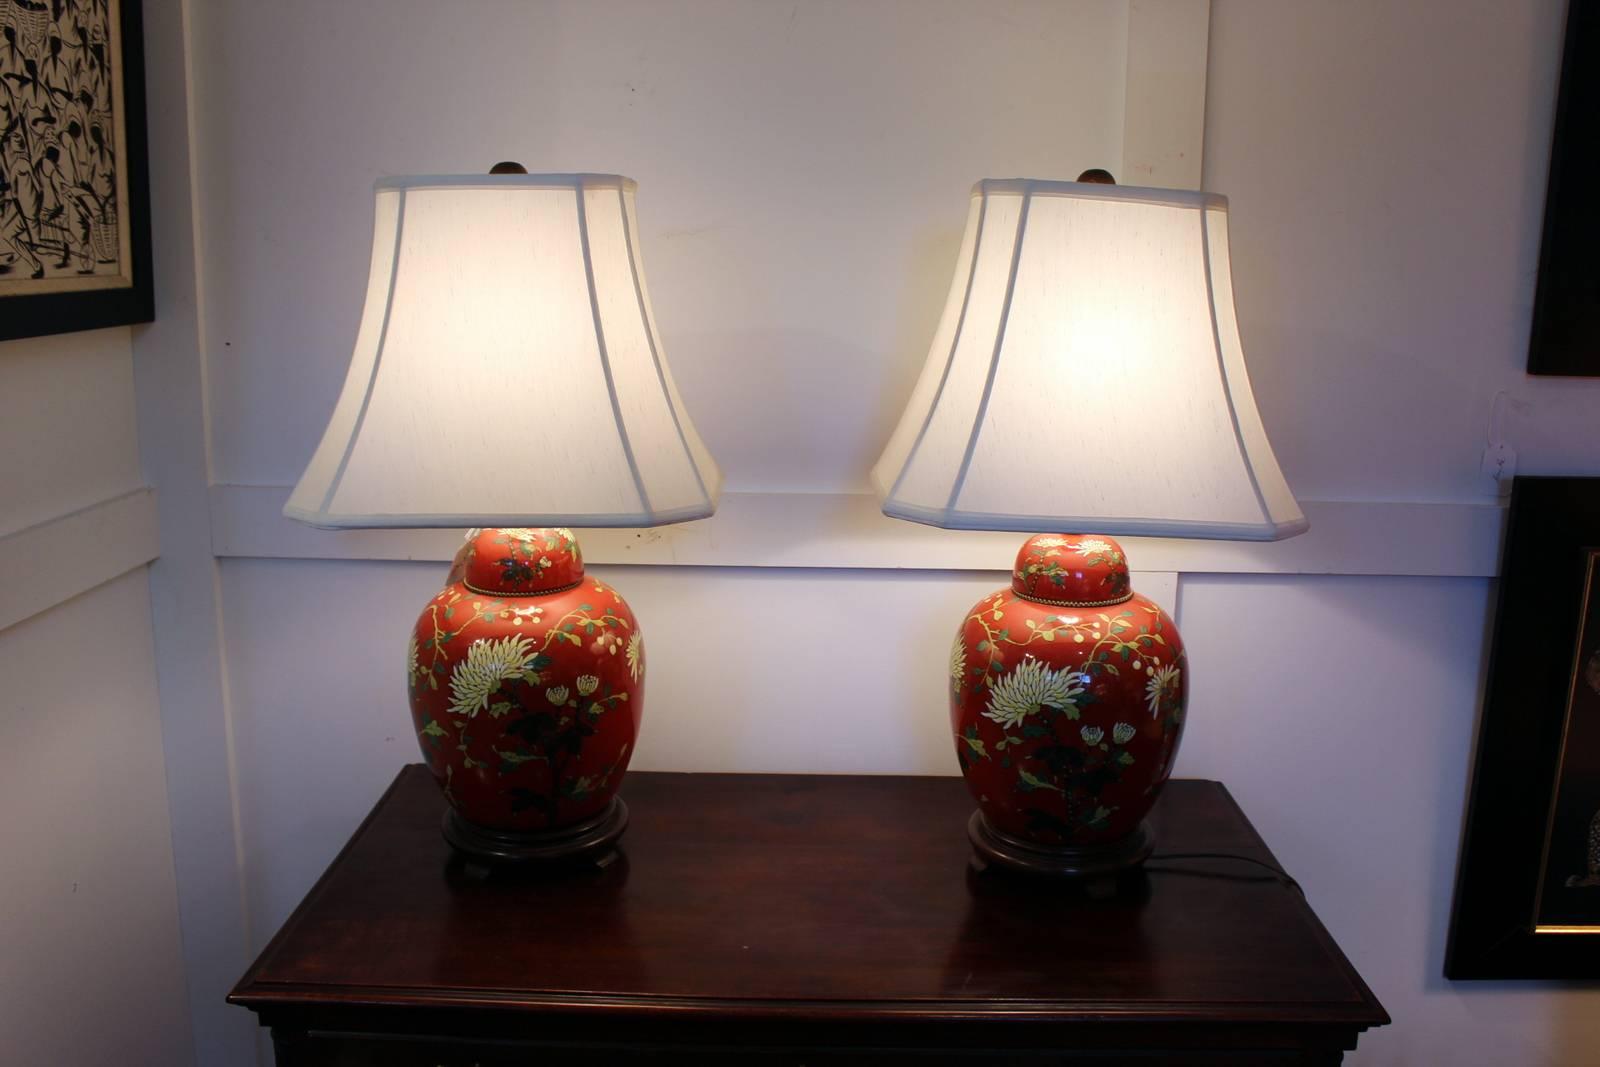 The lamps with iron red background with raised enameled floral decoration rest on wood bases. The wood base with diminutive feet. The shades are for photographic purposes only and not included with these lamps. Light chip on the wood bases.